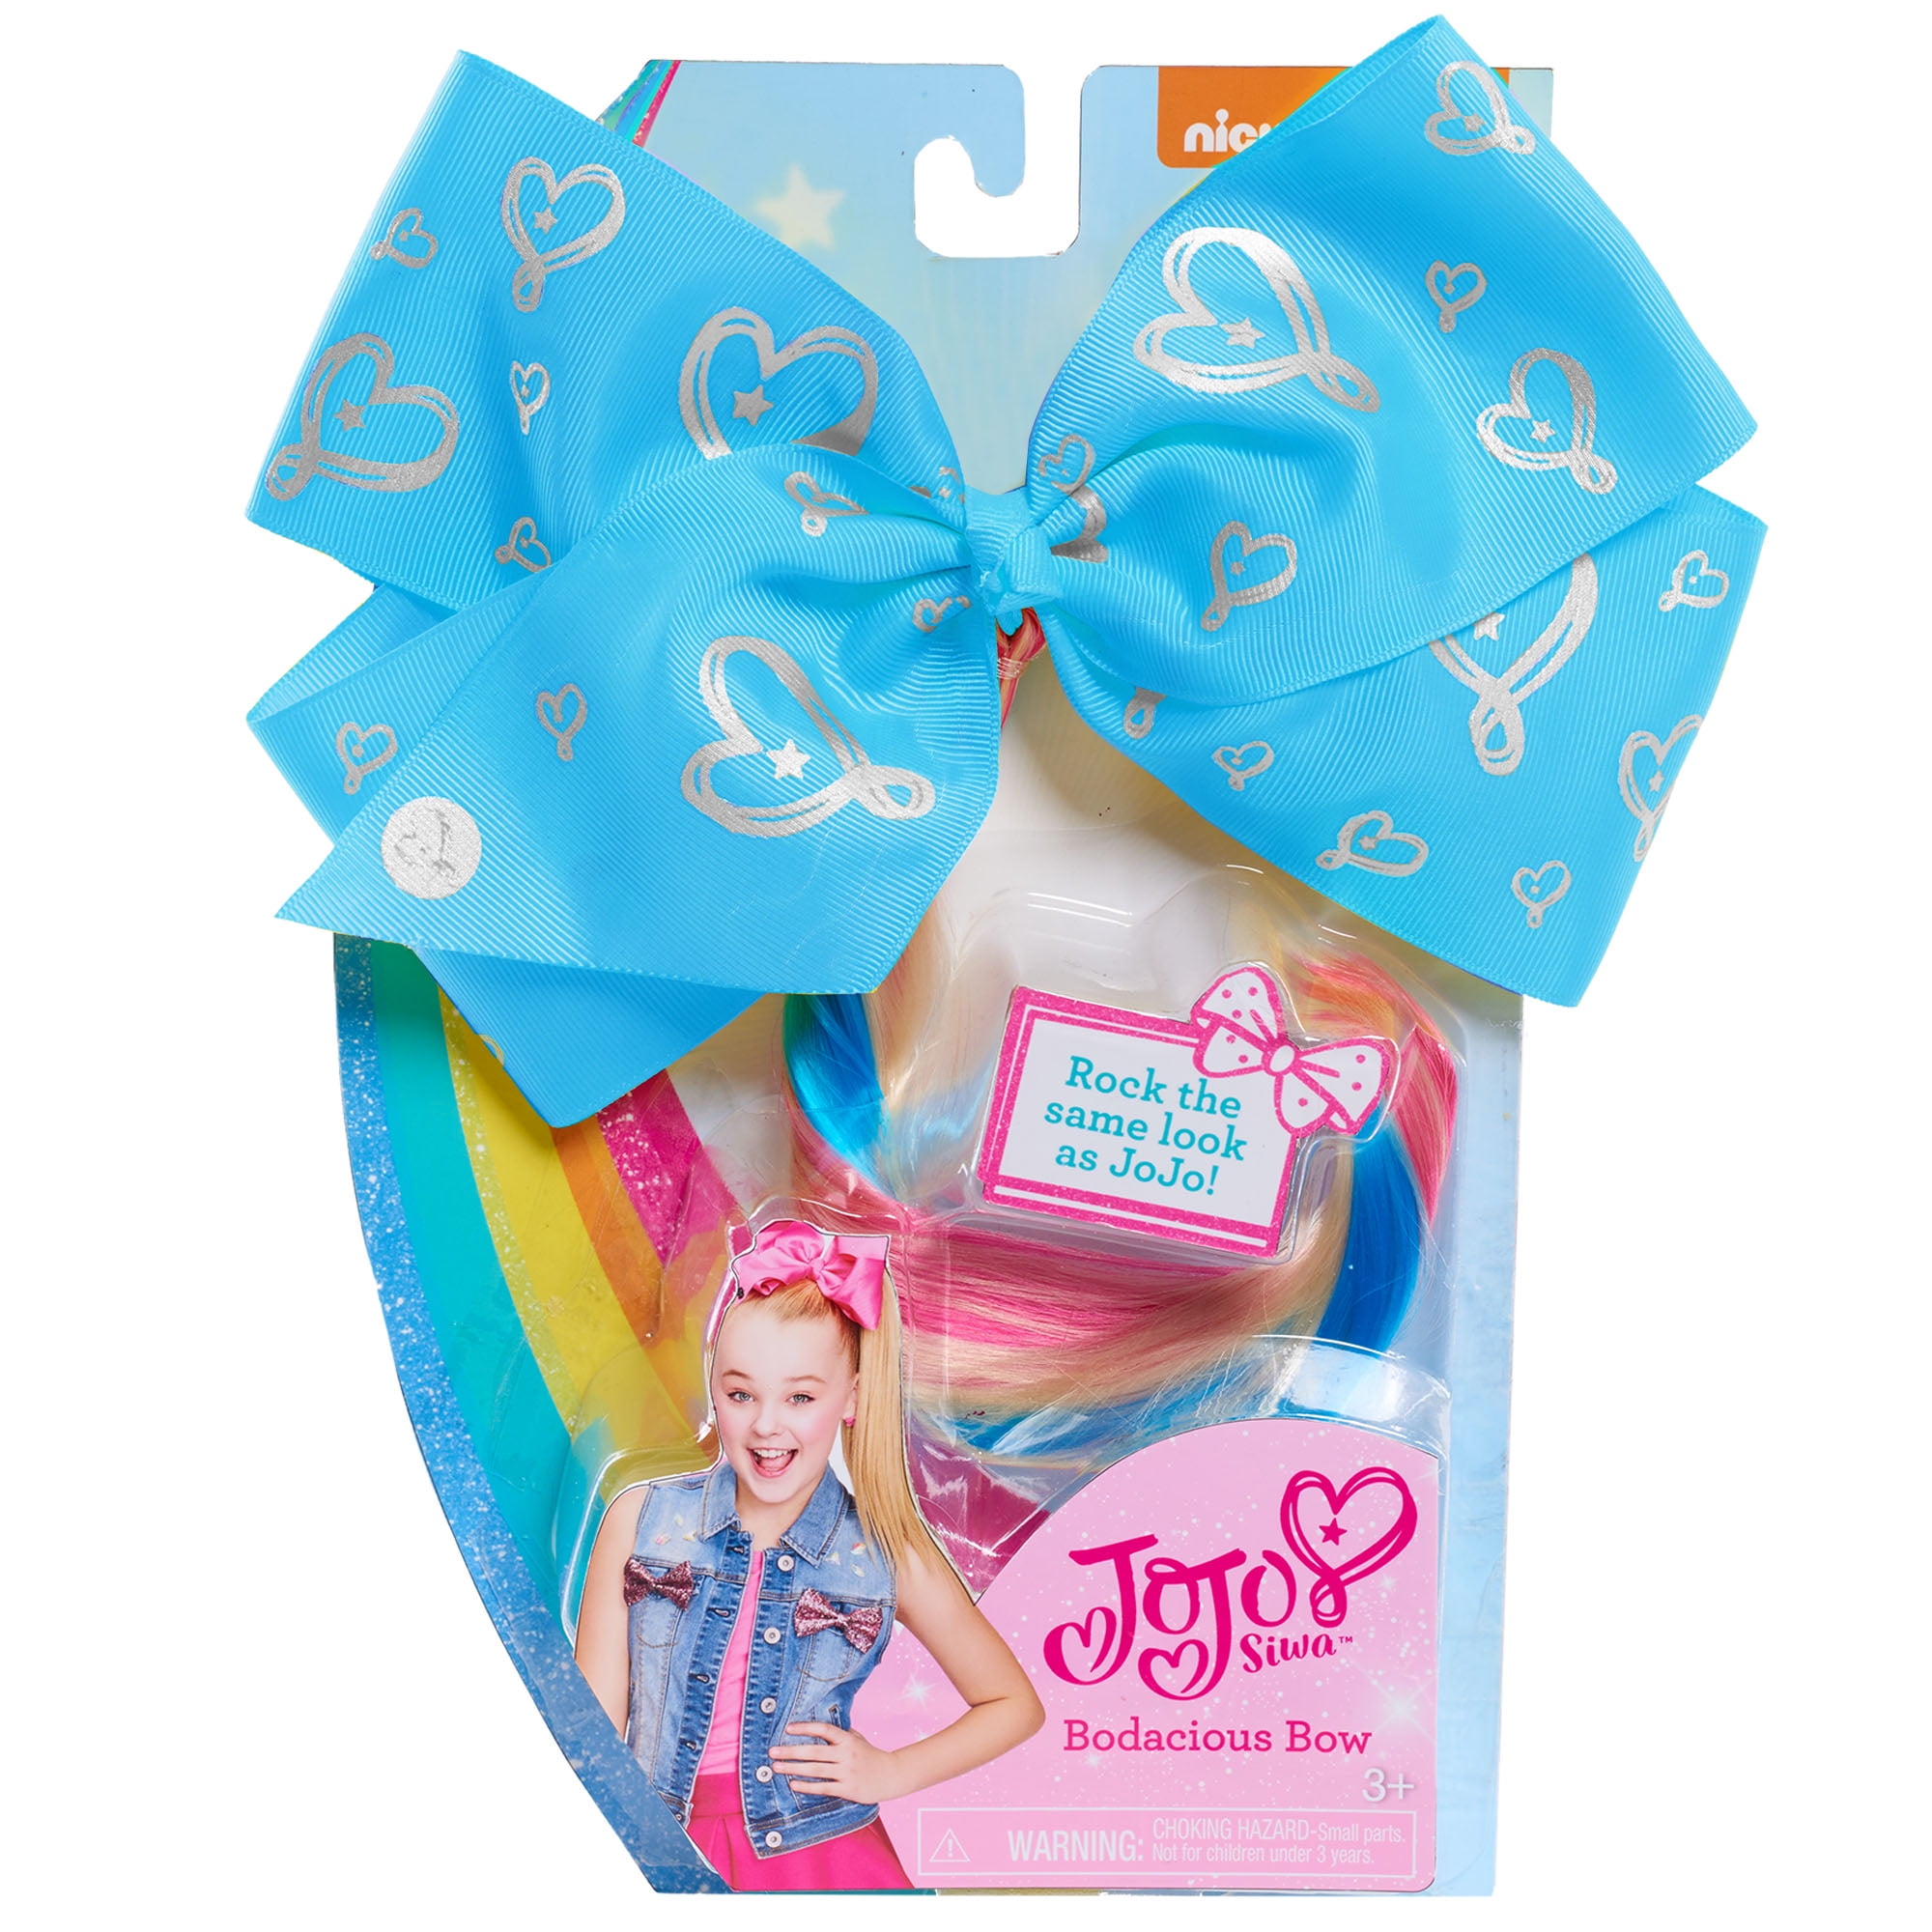 JojoBoutiqueBows 3'' Candy Tulle Baby Hair Clips, Blue